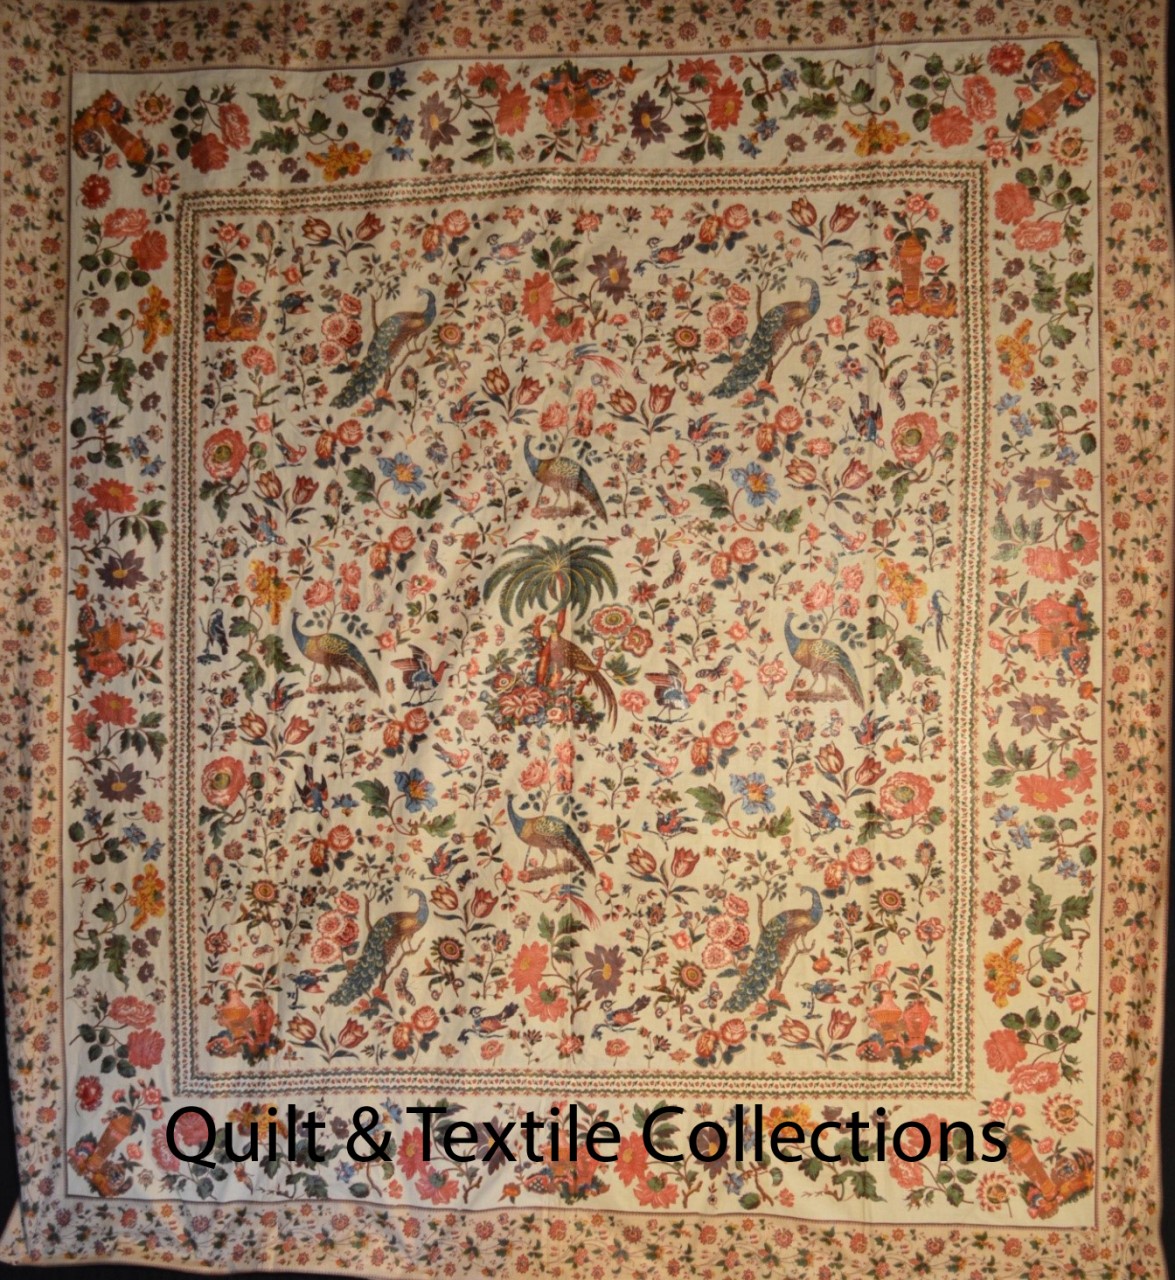 Chintz Quilts from the Poos Collection